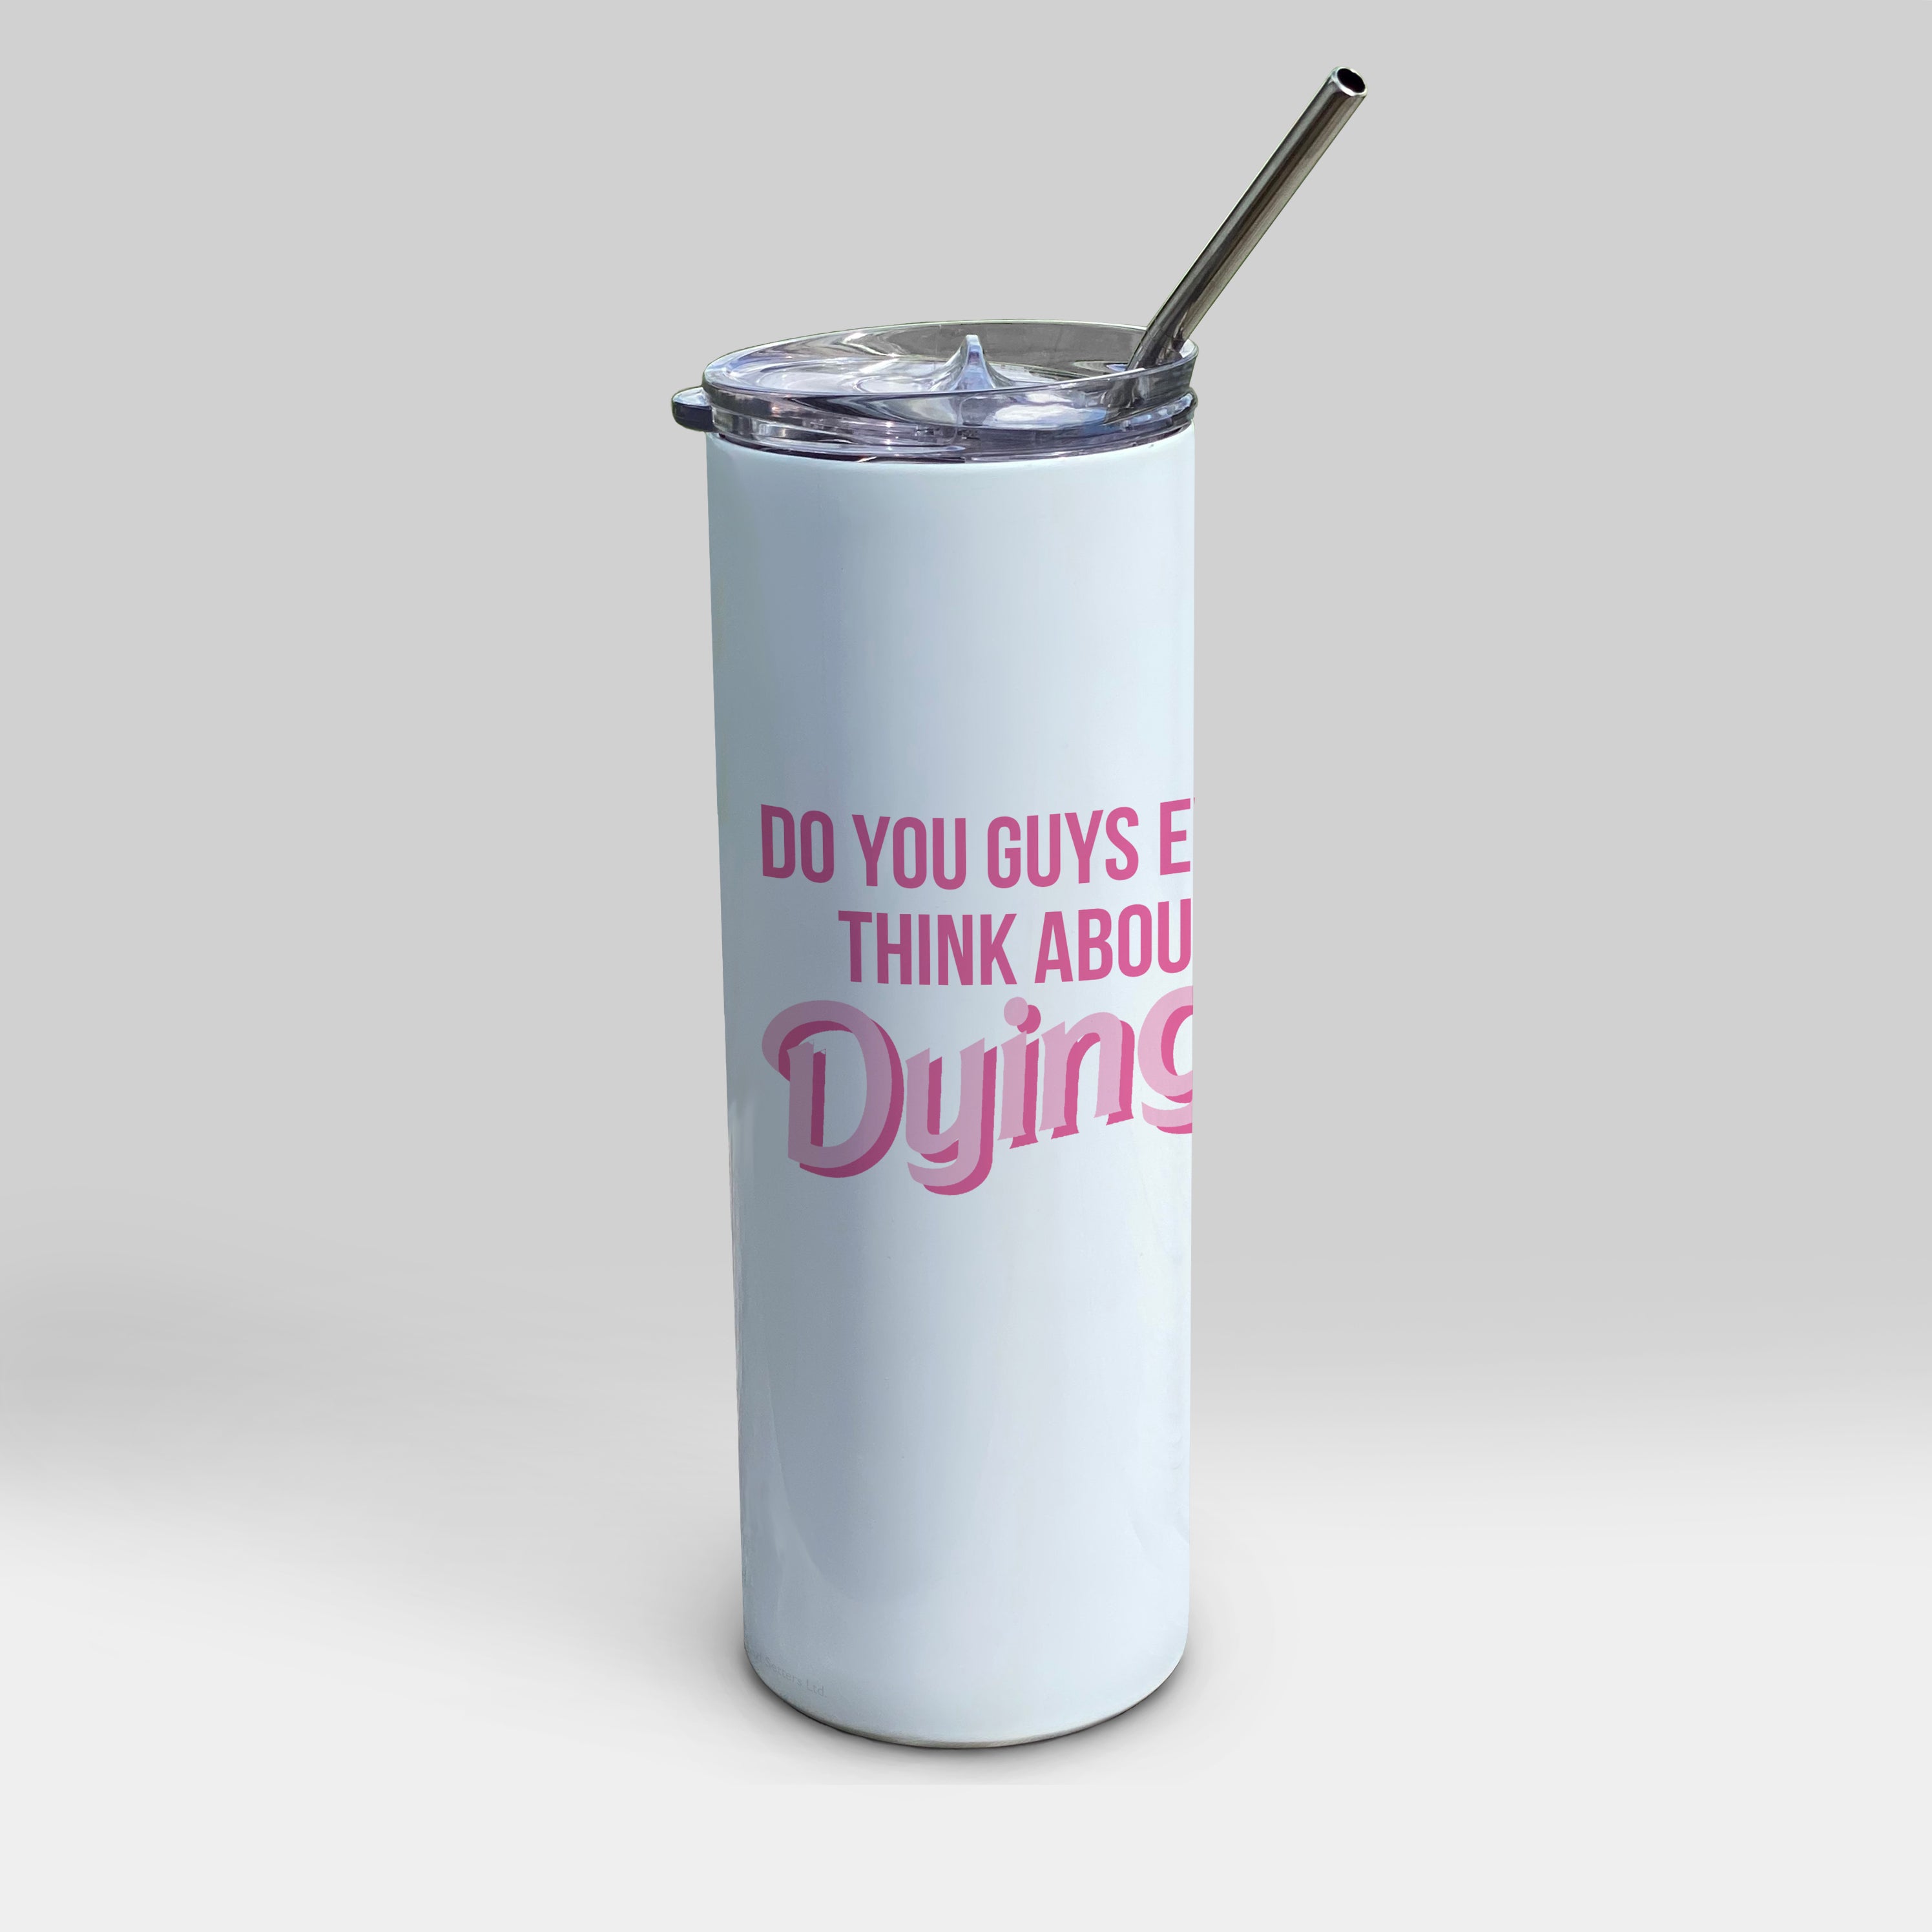 Trend Setters Originals (Do You Guys Ever Think About Dying) 20oz Stainless Steel Tumbler with Straw